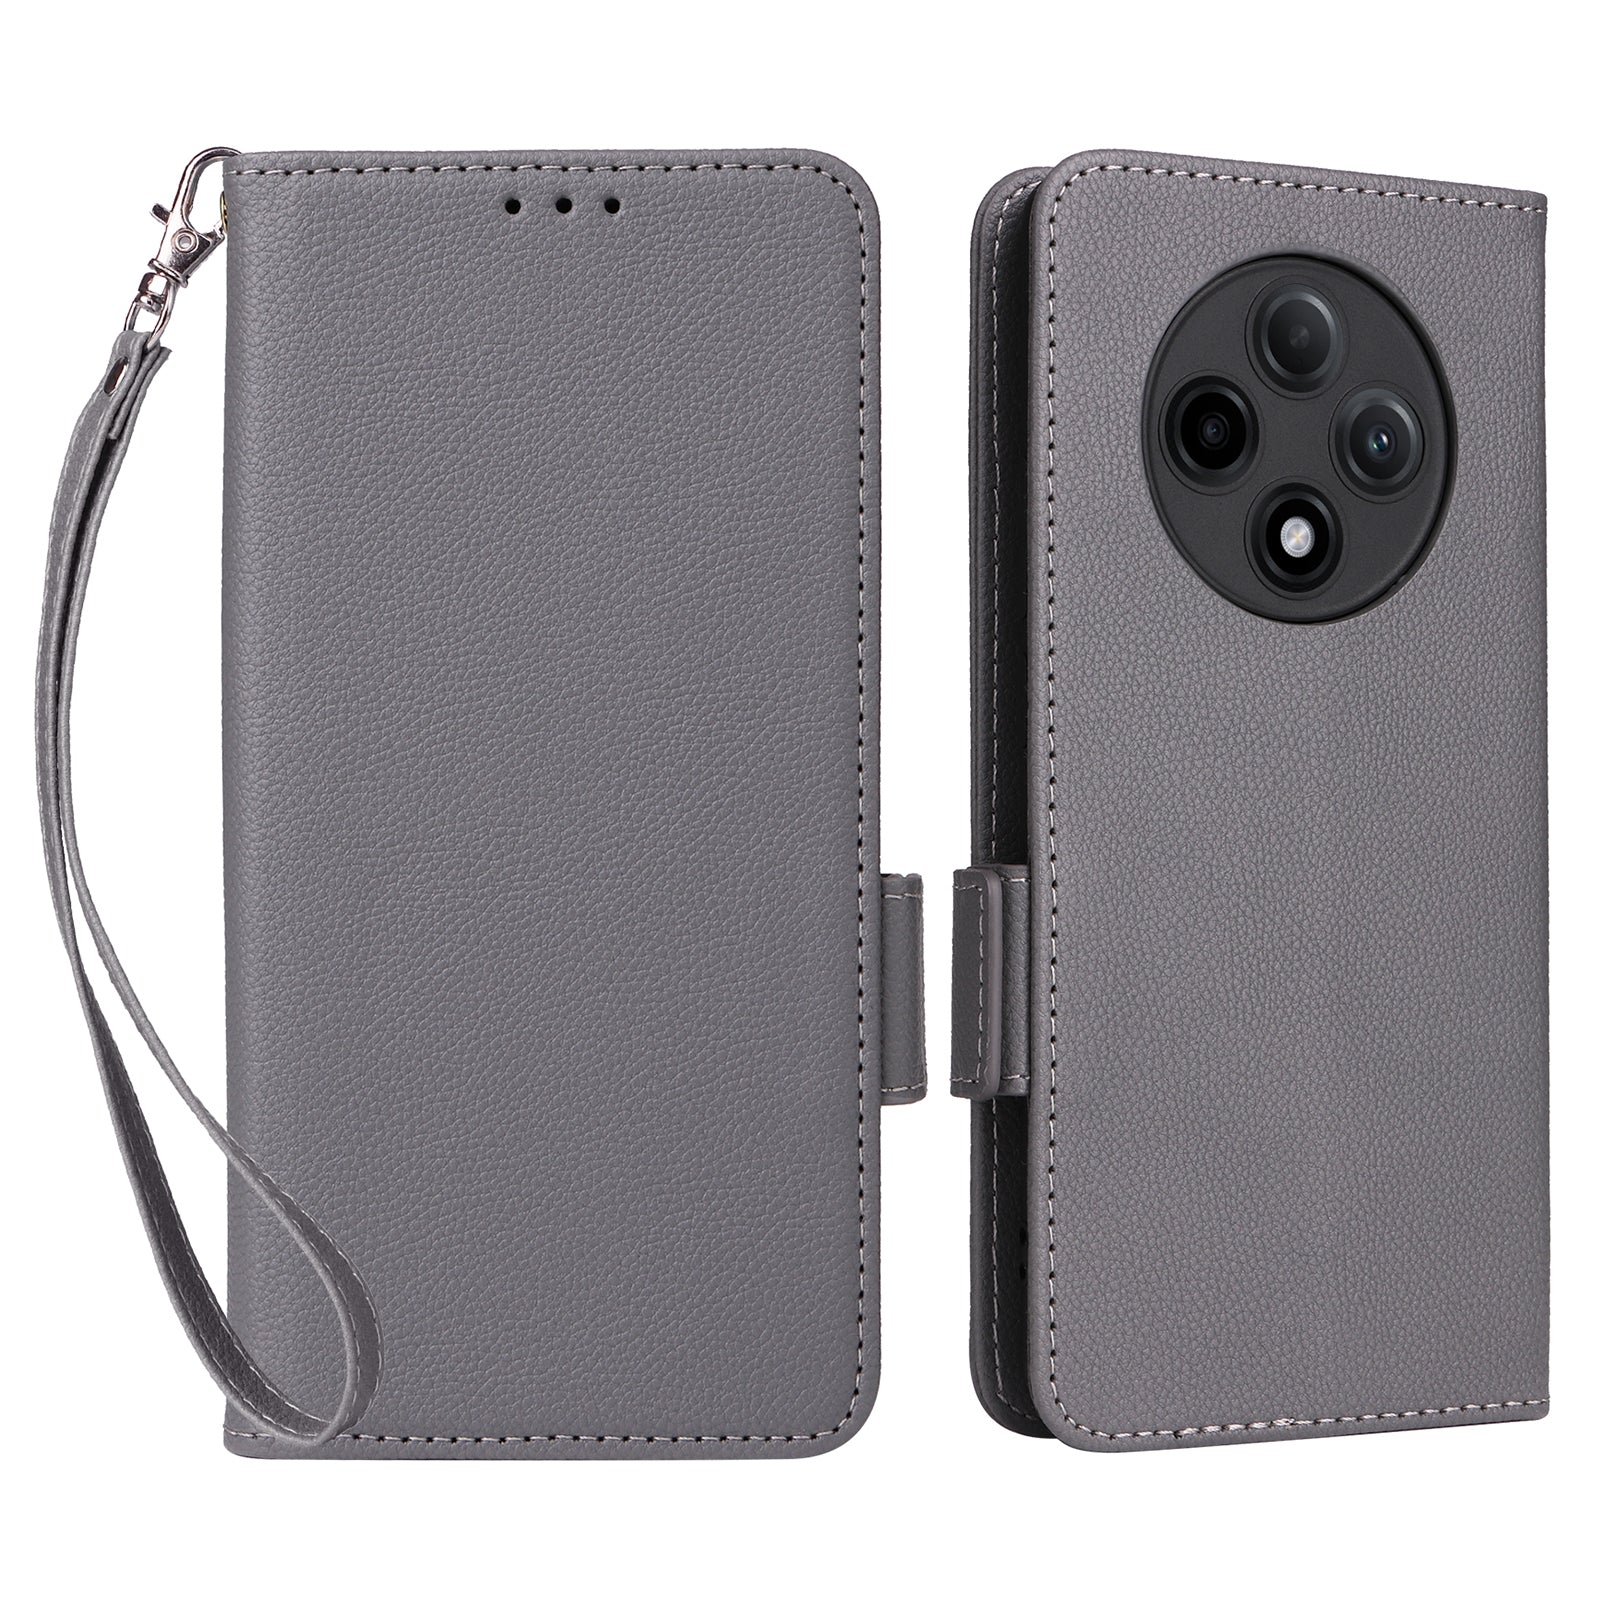 For Oppo A3 Pro 5G Case Leather Phone Cover Mobile Accessories Wholesale Supplier - Grey